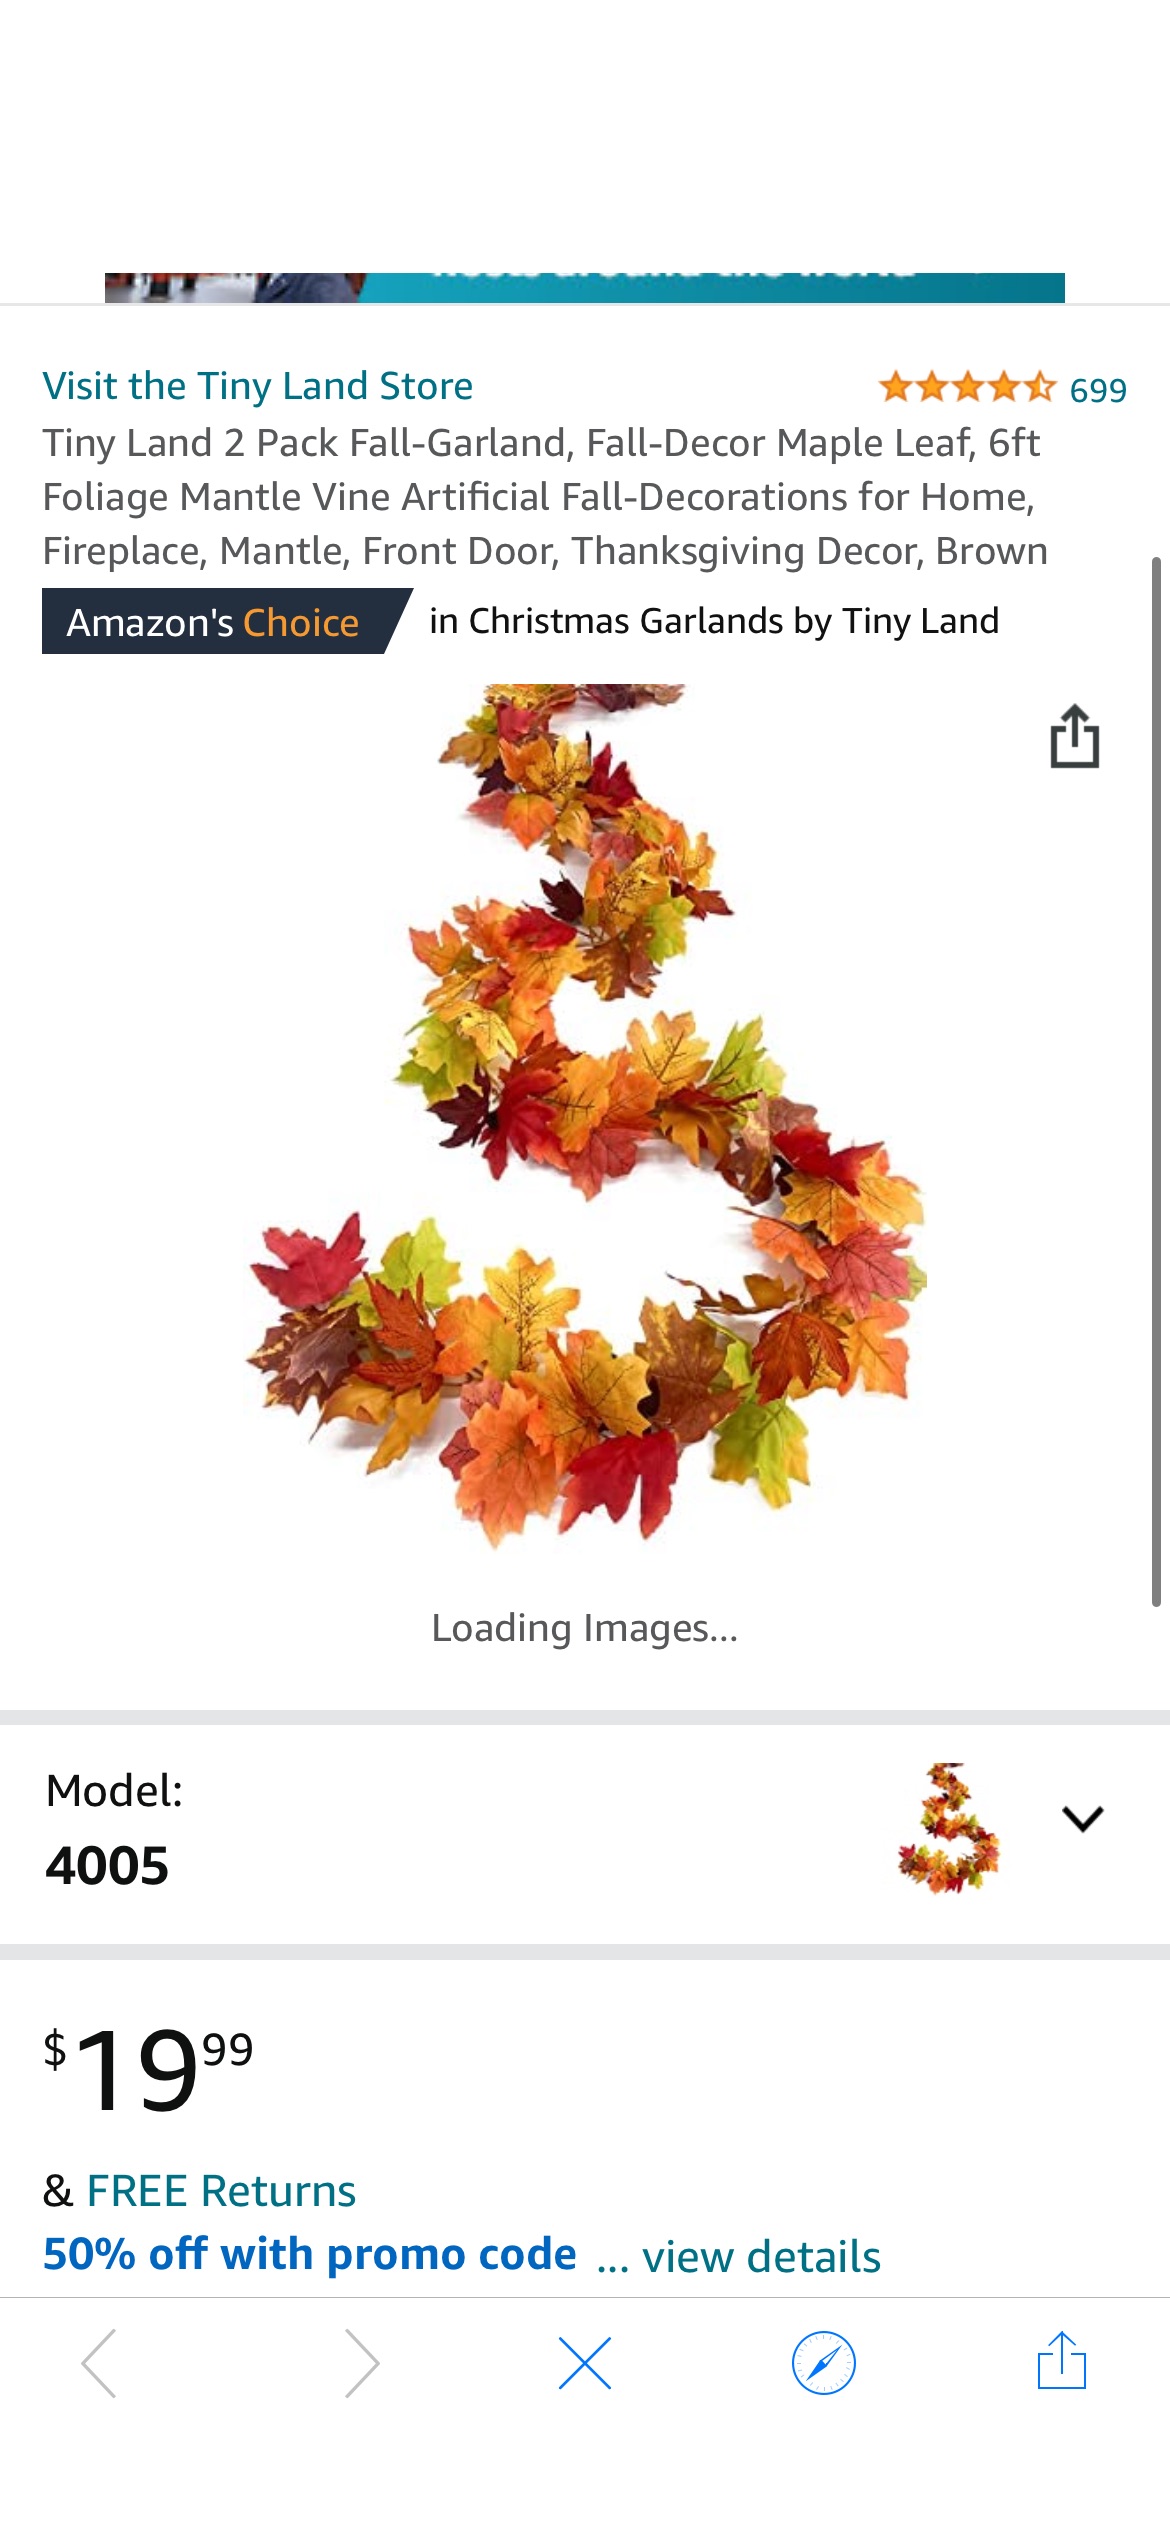 Amazon.com: Tiny Land 2 Pack Fall-Garland, Fall-Decor Maple Leaf, 6ft Foliage Mantle Vine Artificial Fall-Decorations for Home, Fireplace, Mantle